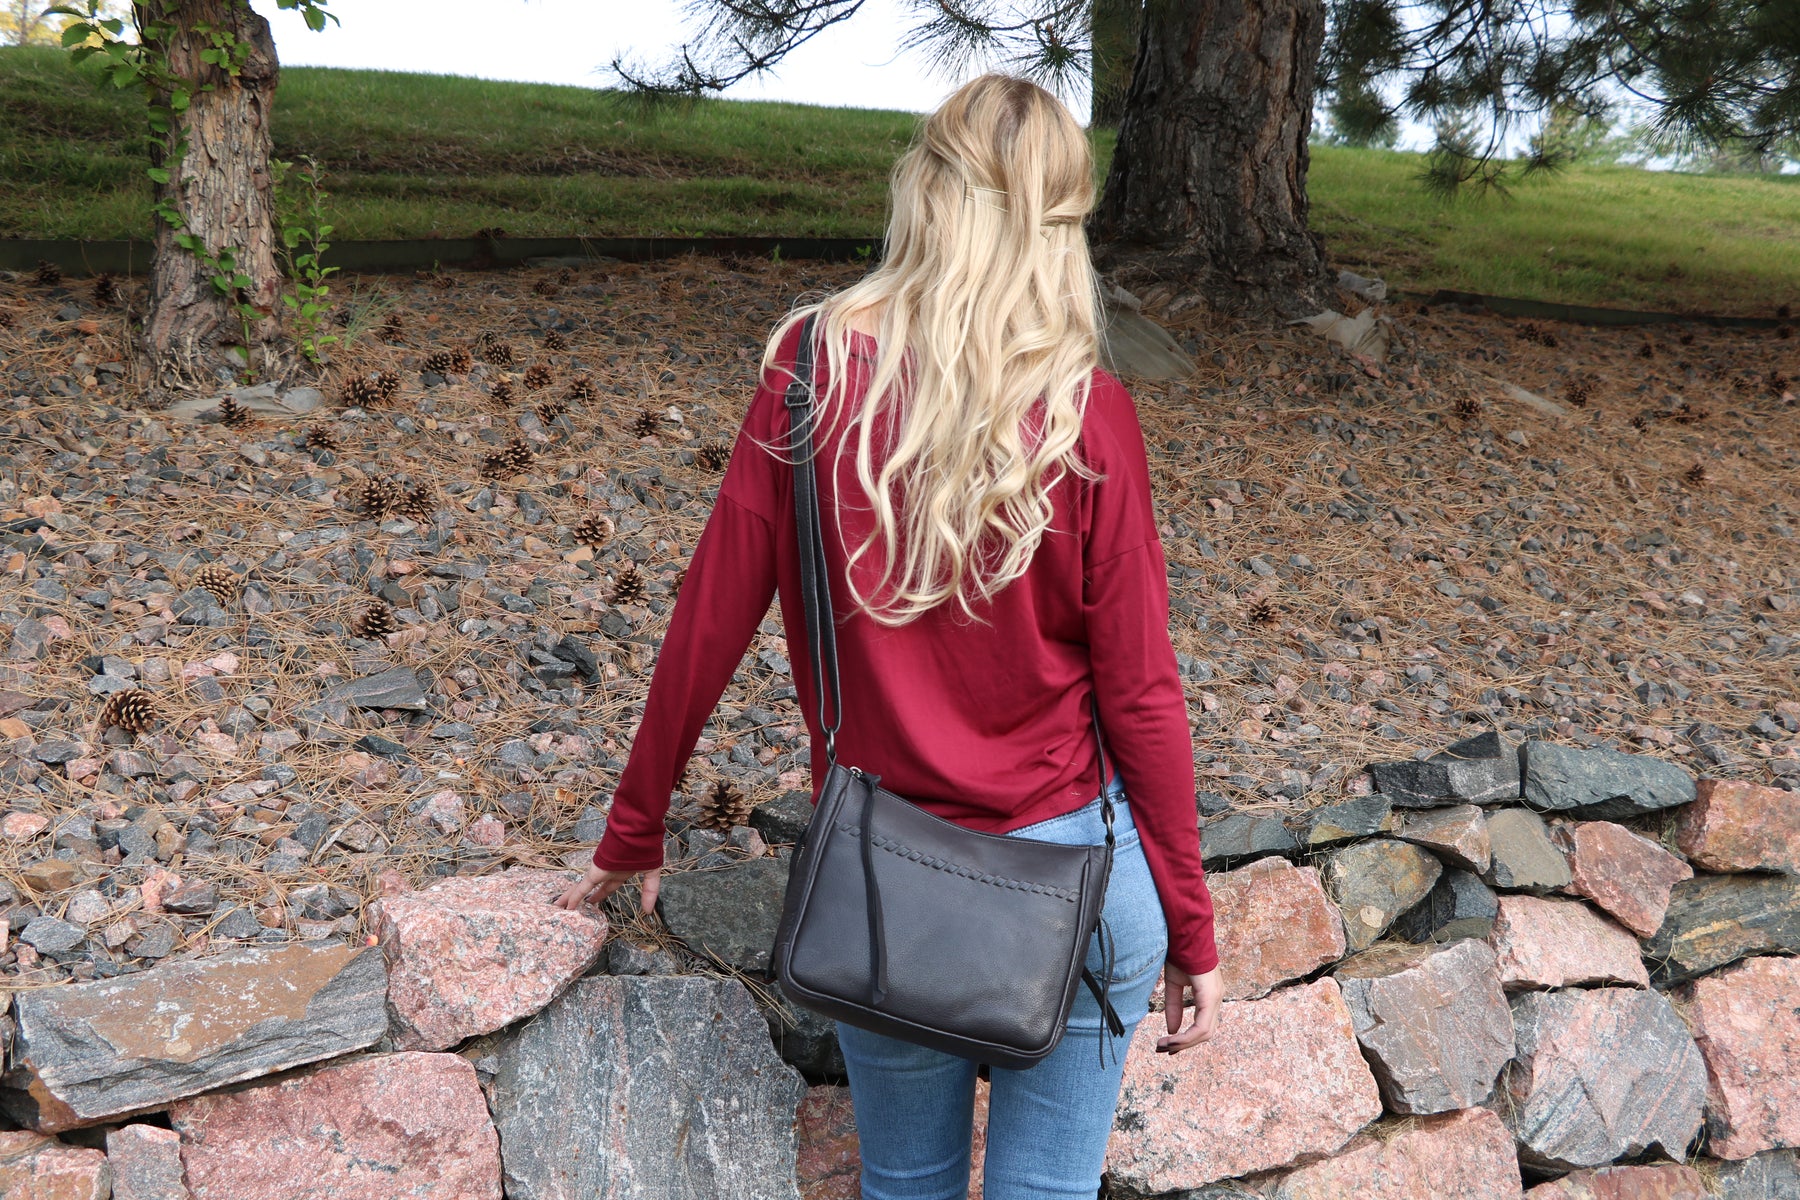 Concealed Carry Brynn Arched Leather Crossbody